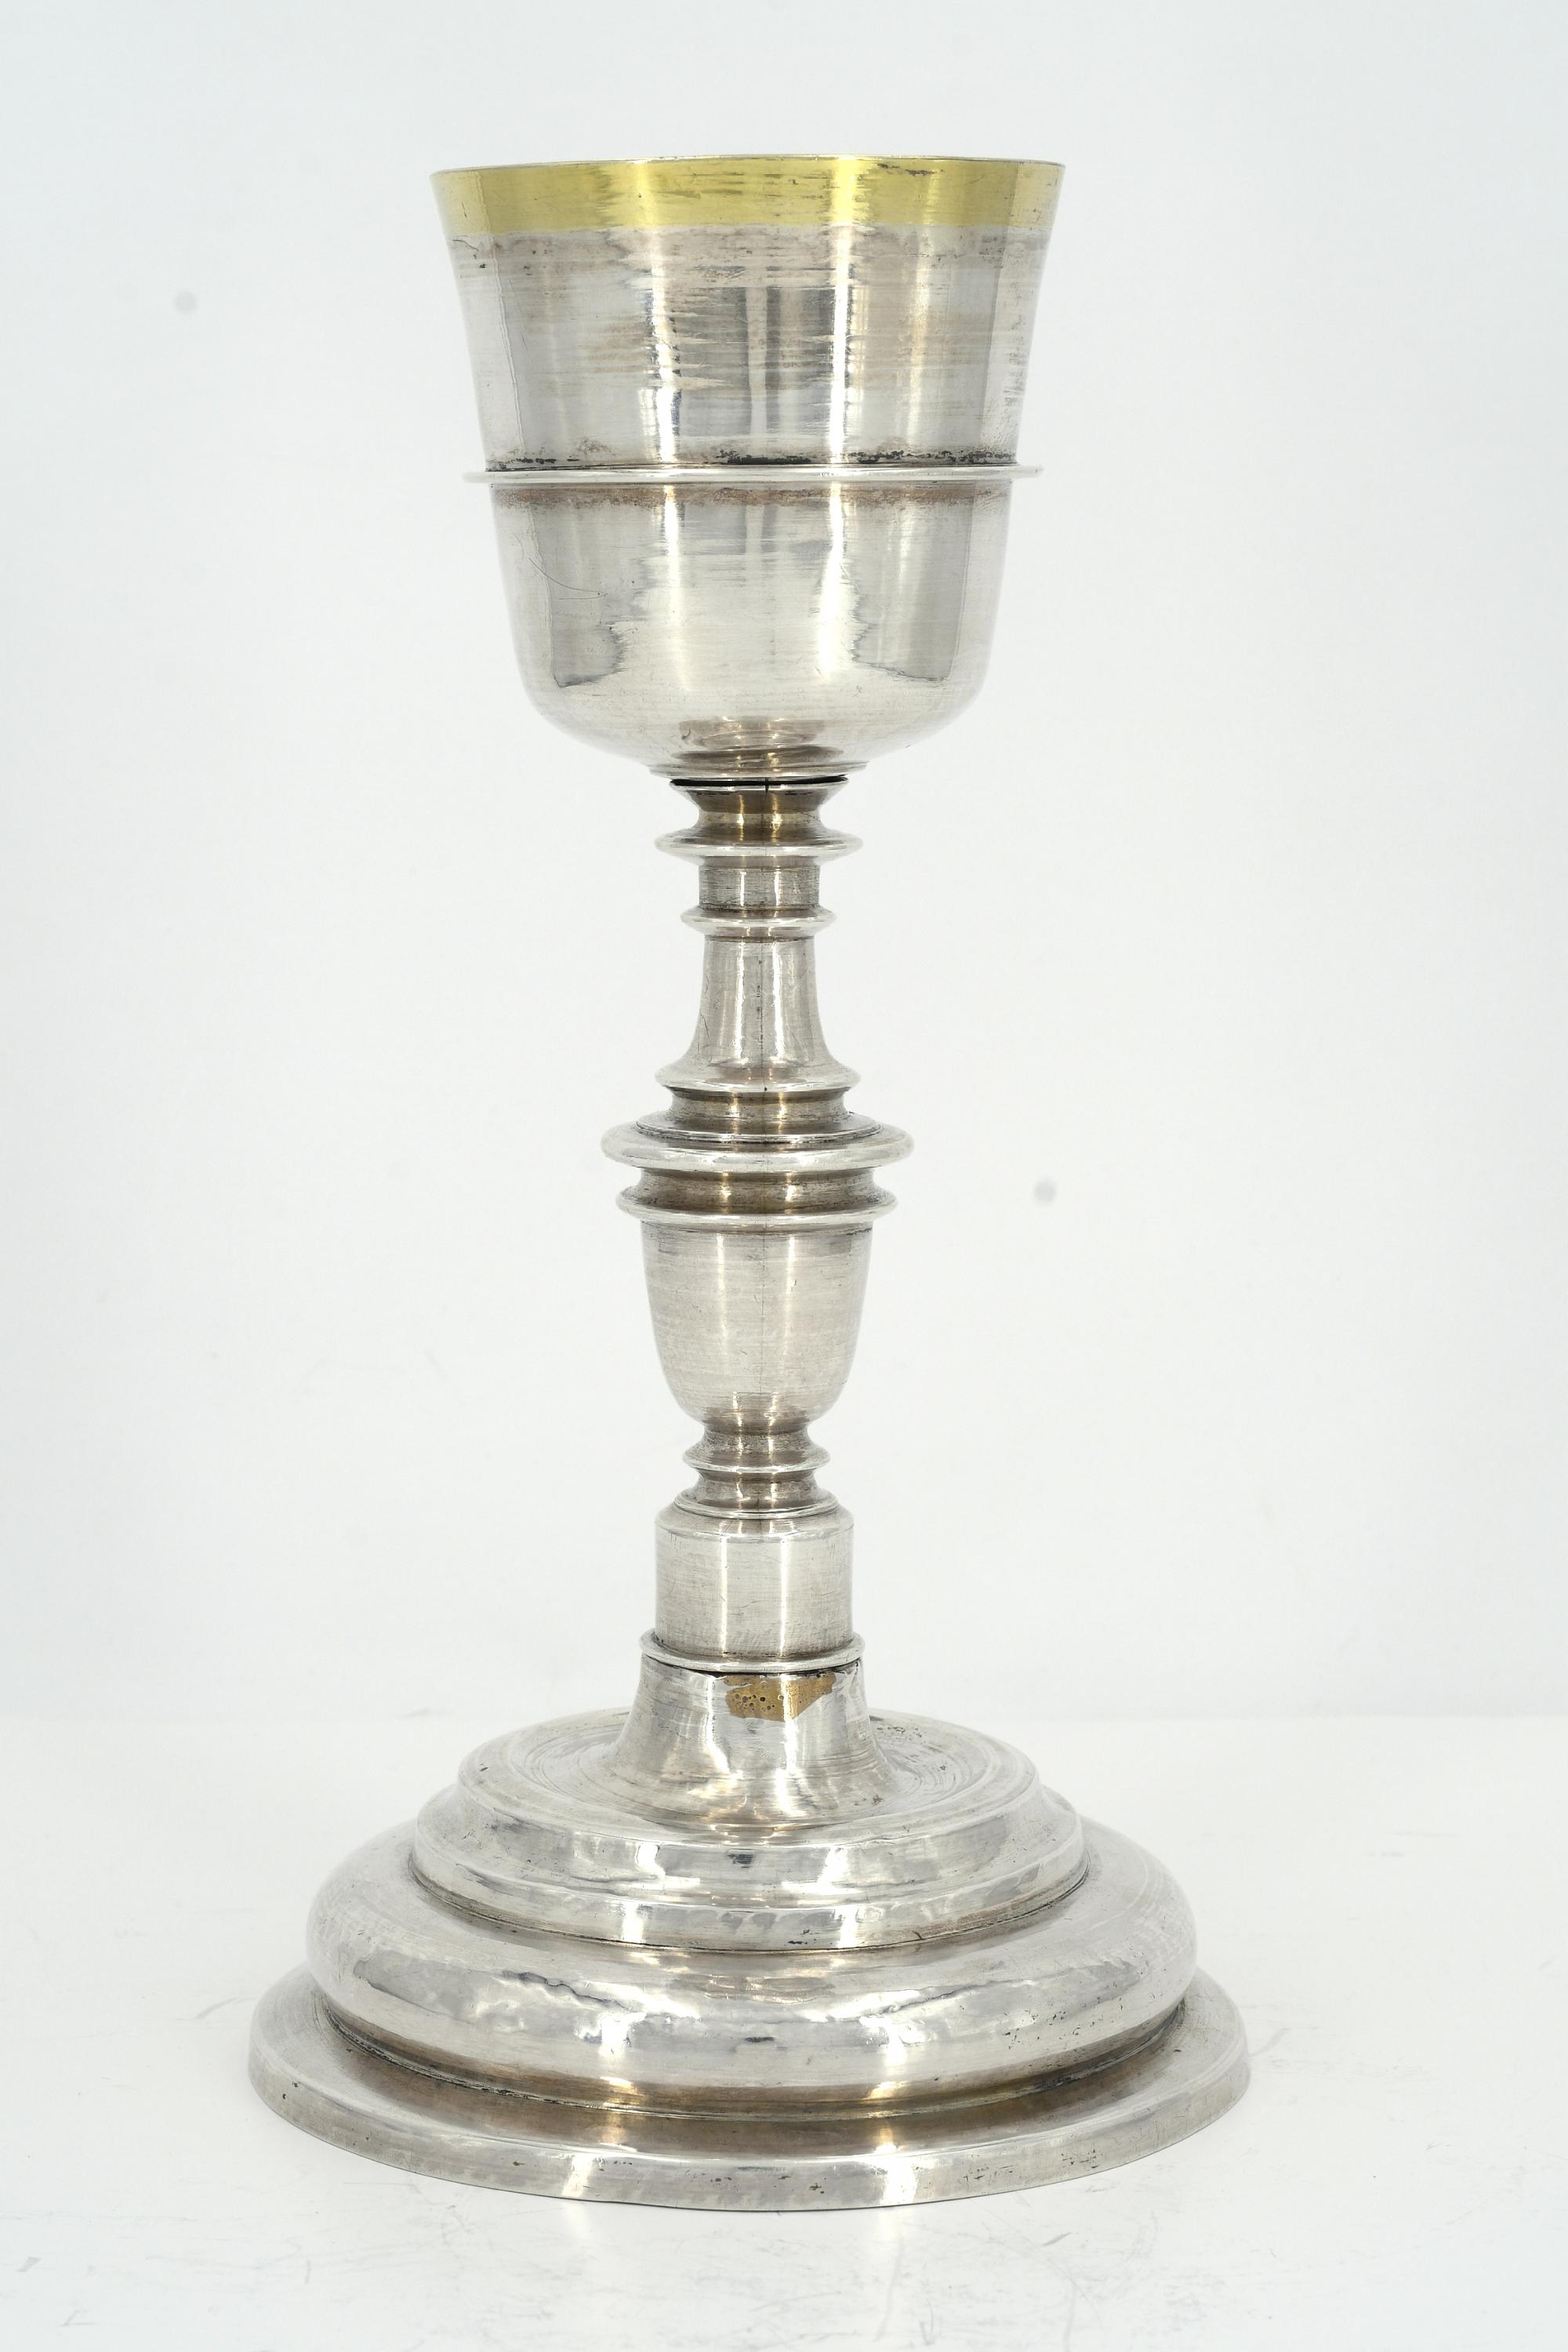 Silver goblet - Image 5 of 7